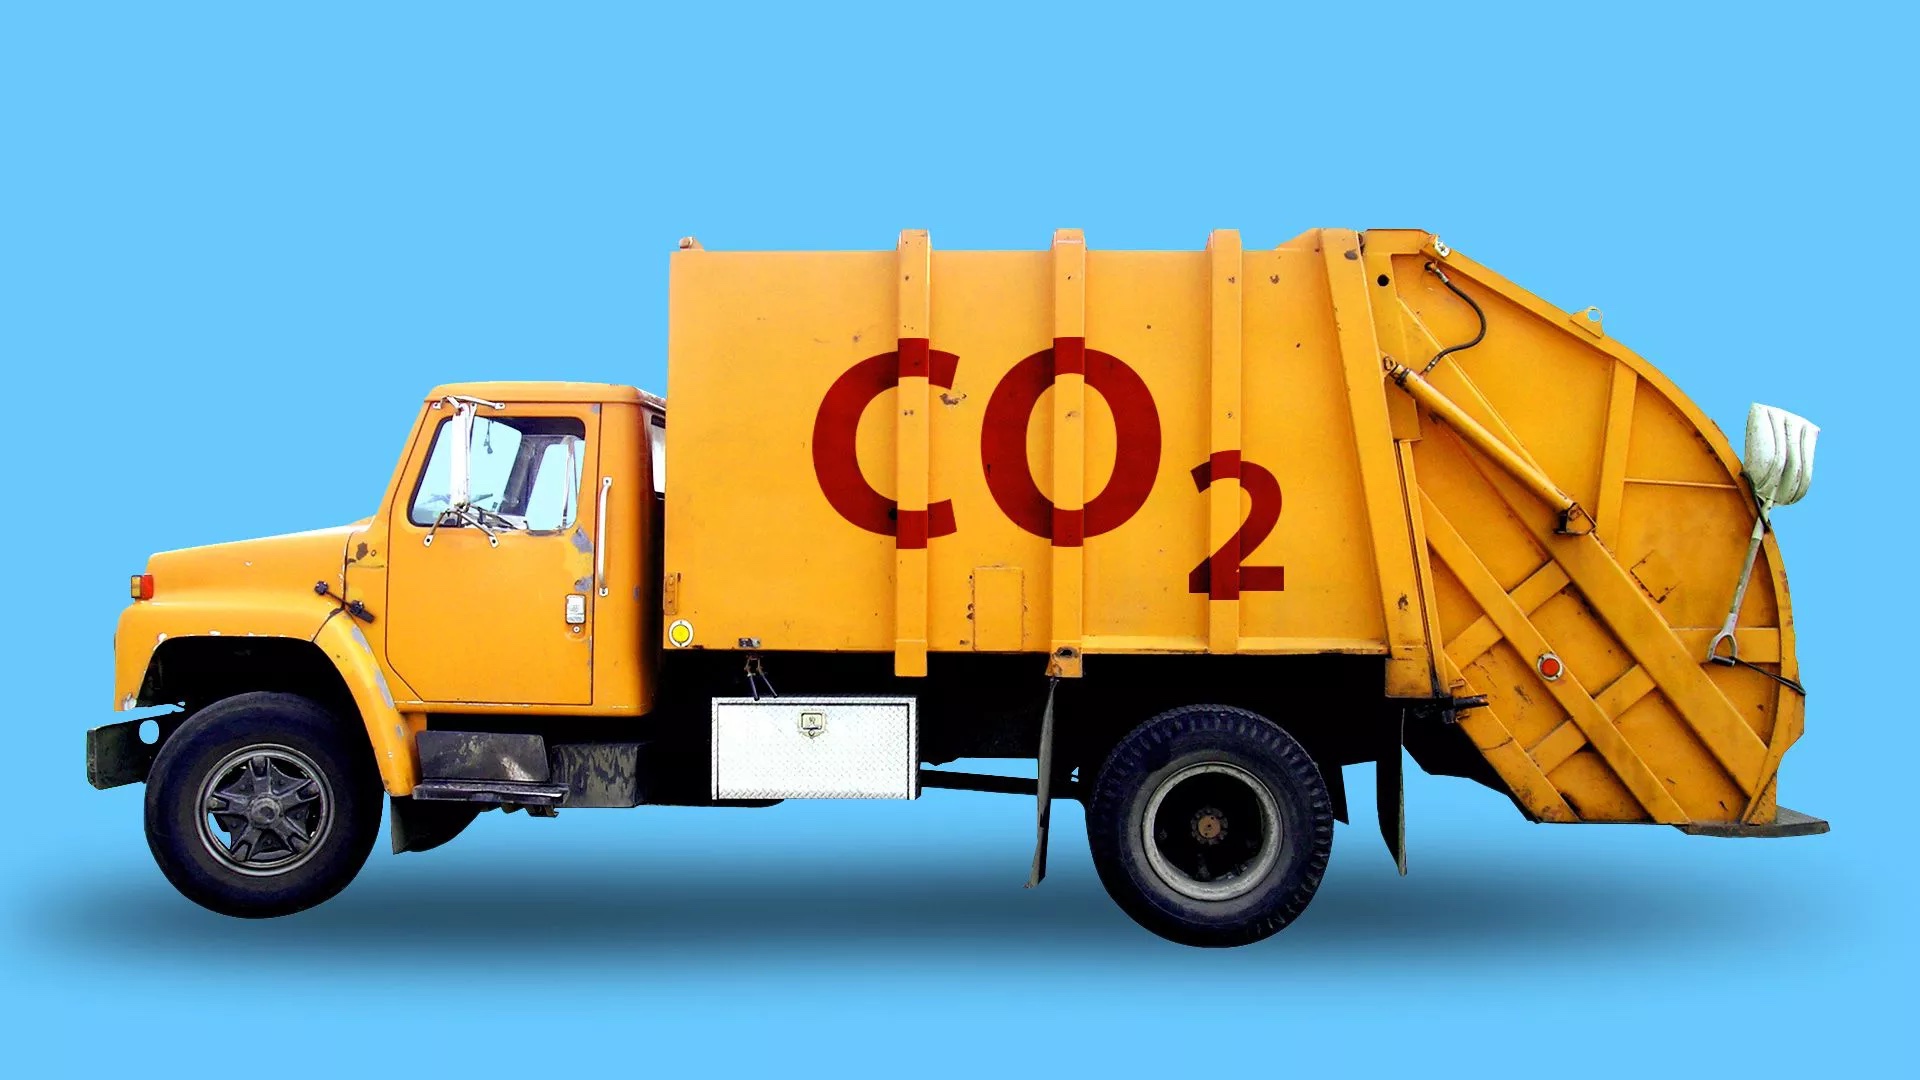 Yellow dump truck with CO2 written on its side